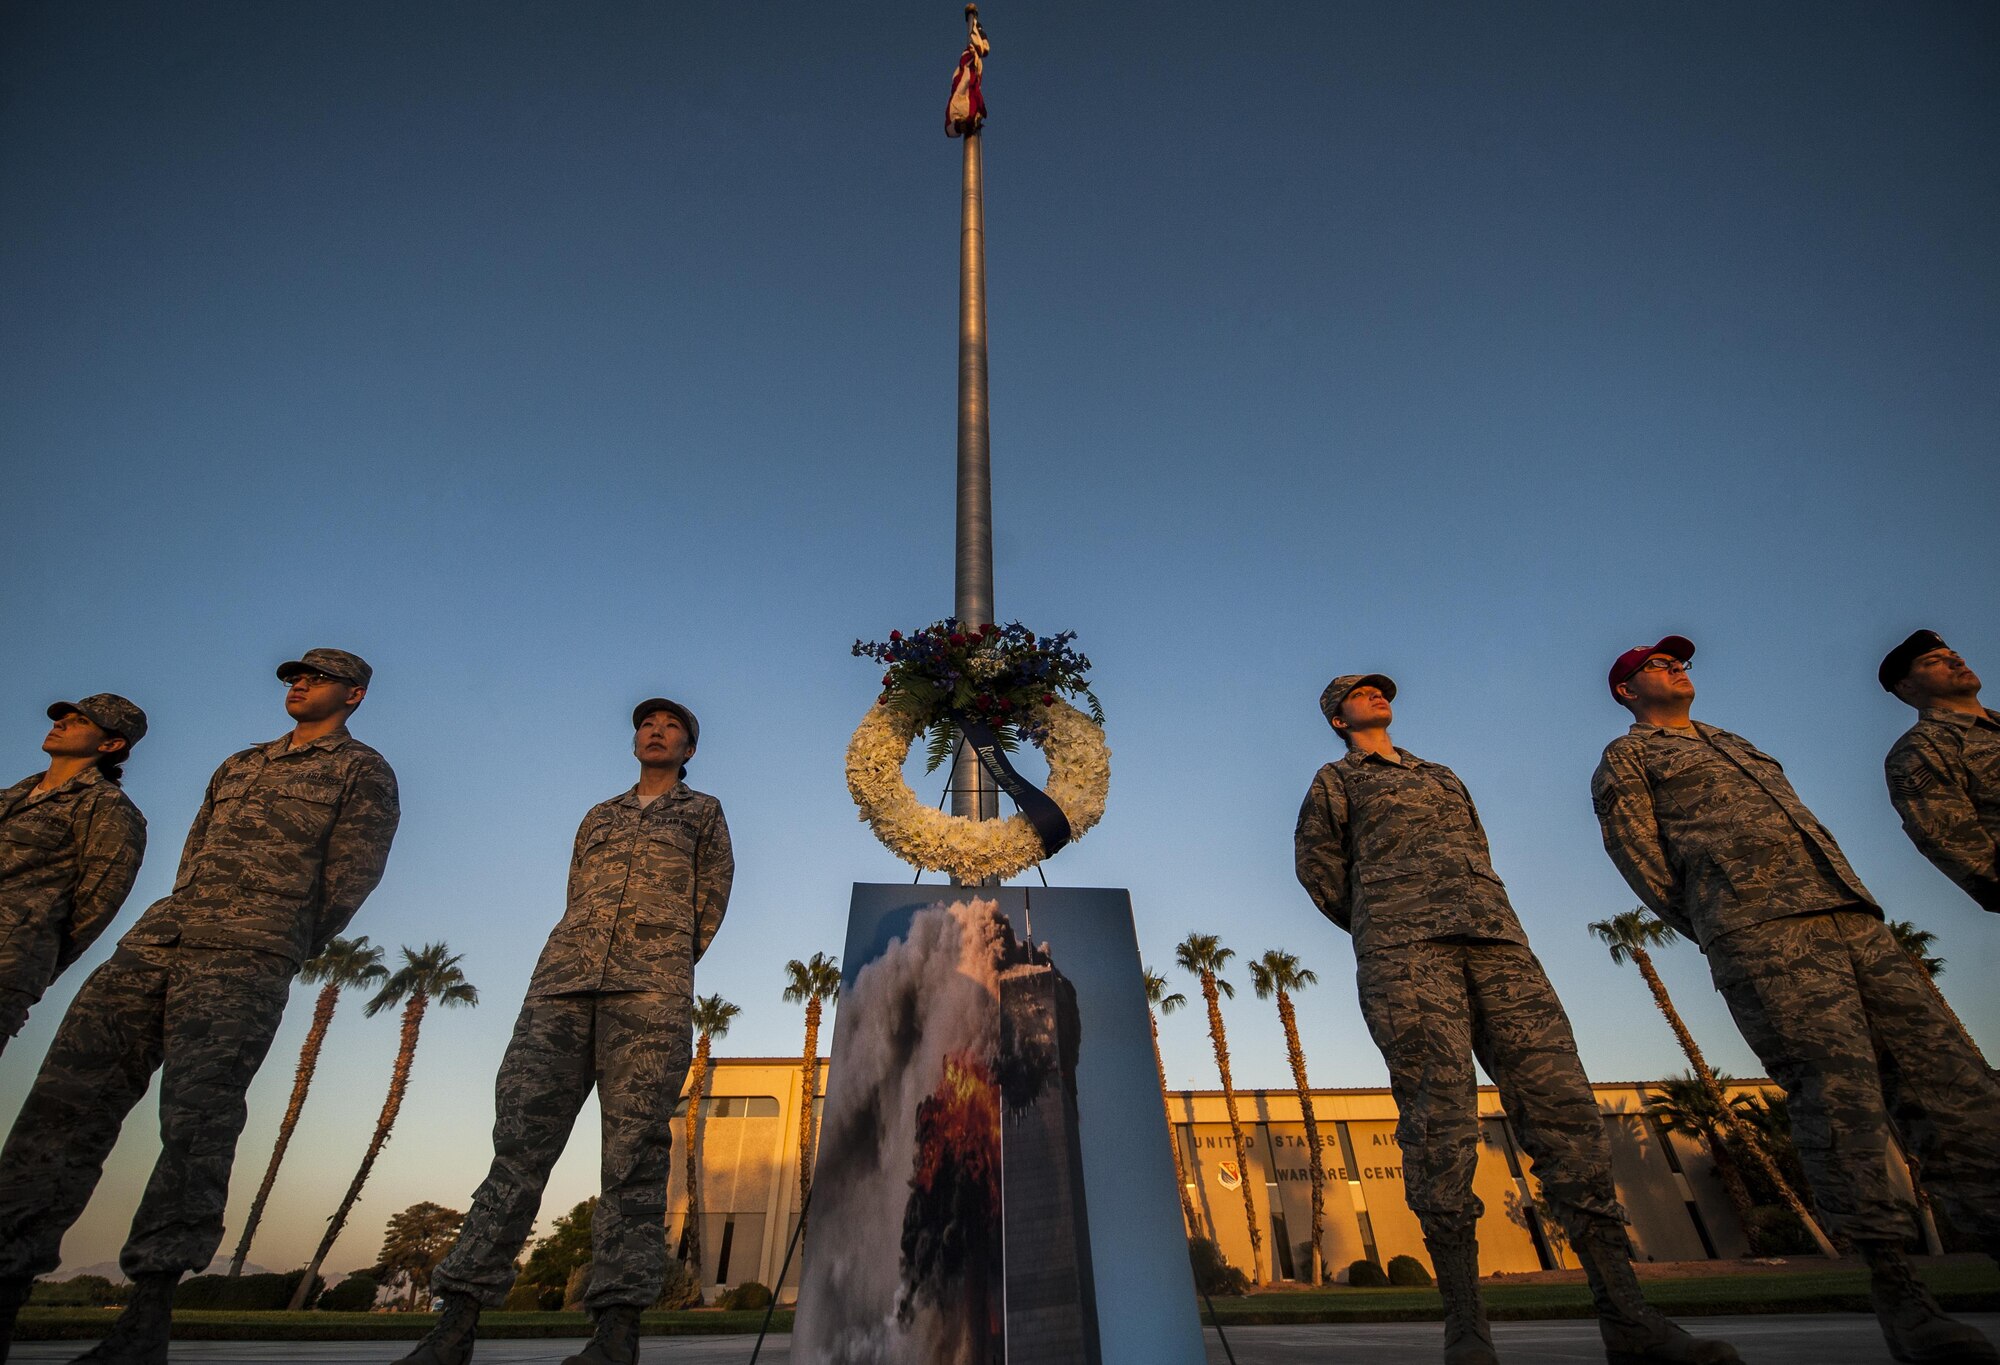 Airmen from Nellis Air Force Base stand at parade rest to honor the lives lost on Sept. 11 in front of the United States Air Force Warfare Center, Sept. 9, 2016. Airmen volunteered thirty minutes of their time to stand at parade rest in order to show their appreciation for the victims of 9/11. (U.S. Air Force photo by Airman 1st Class Kevin Tanenbaum/Released)